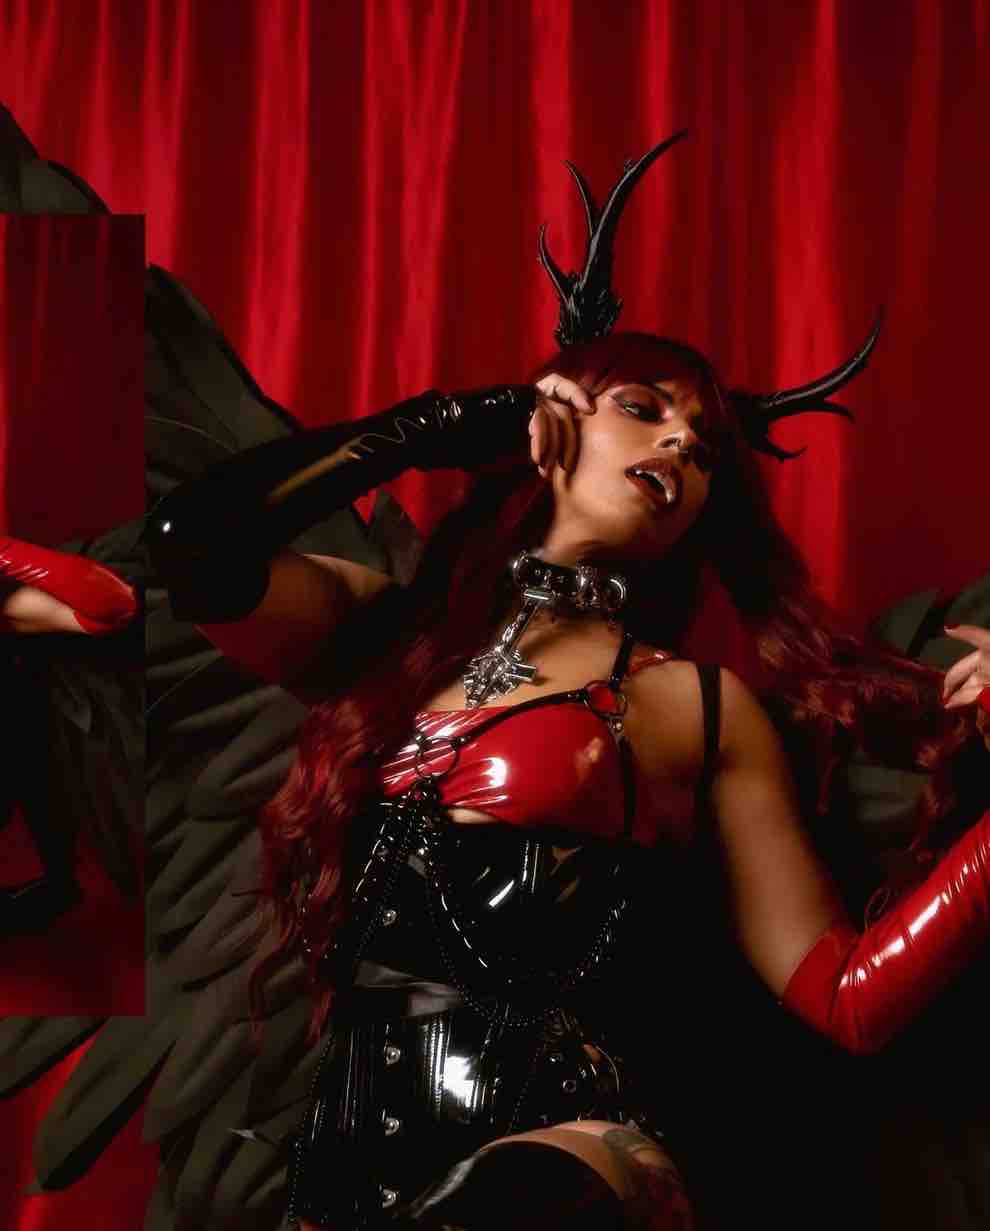 A cosplayer with large black wings and horns wears the Black Patent PVC Longline Underbust Corset - Hourglass over a red pvc dress.